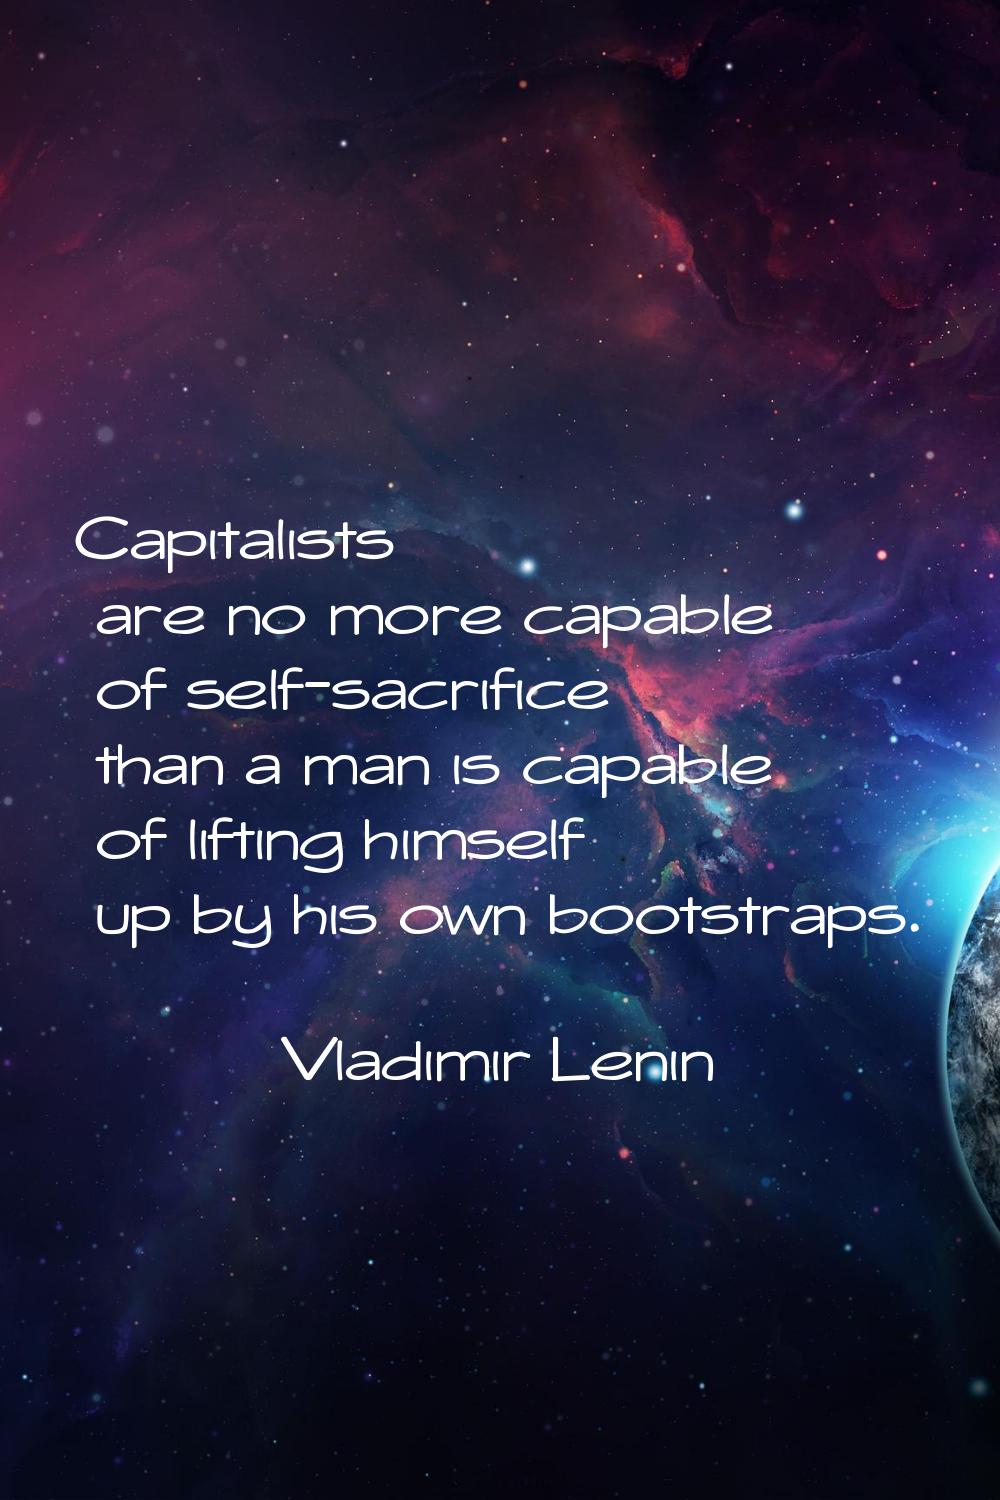 Capitalists are no more capable of self-sacrifice than a man is capable of lifting himself up by hi